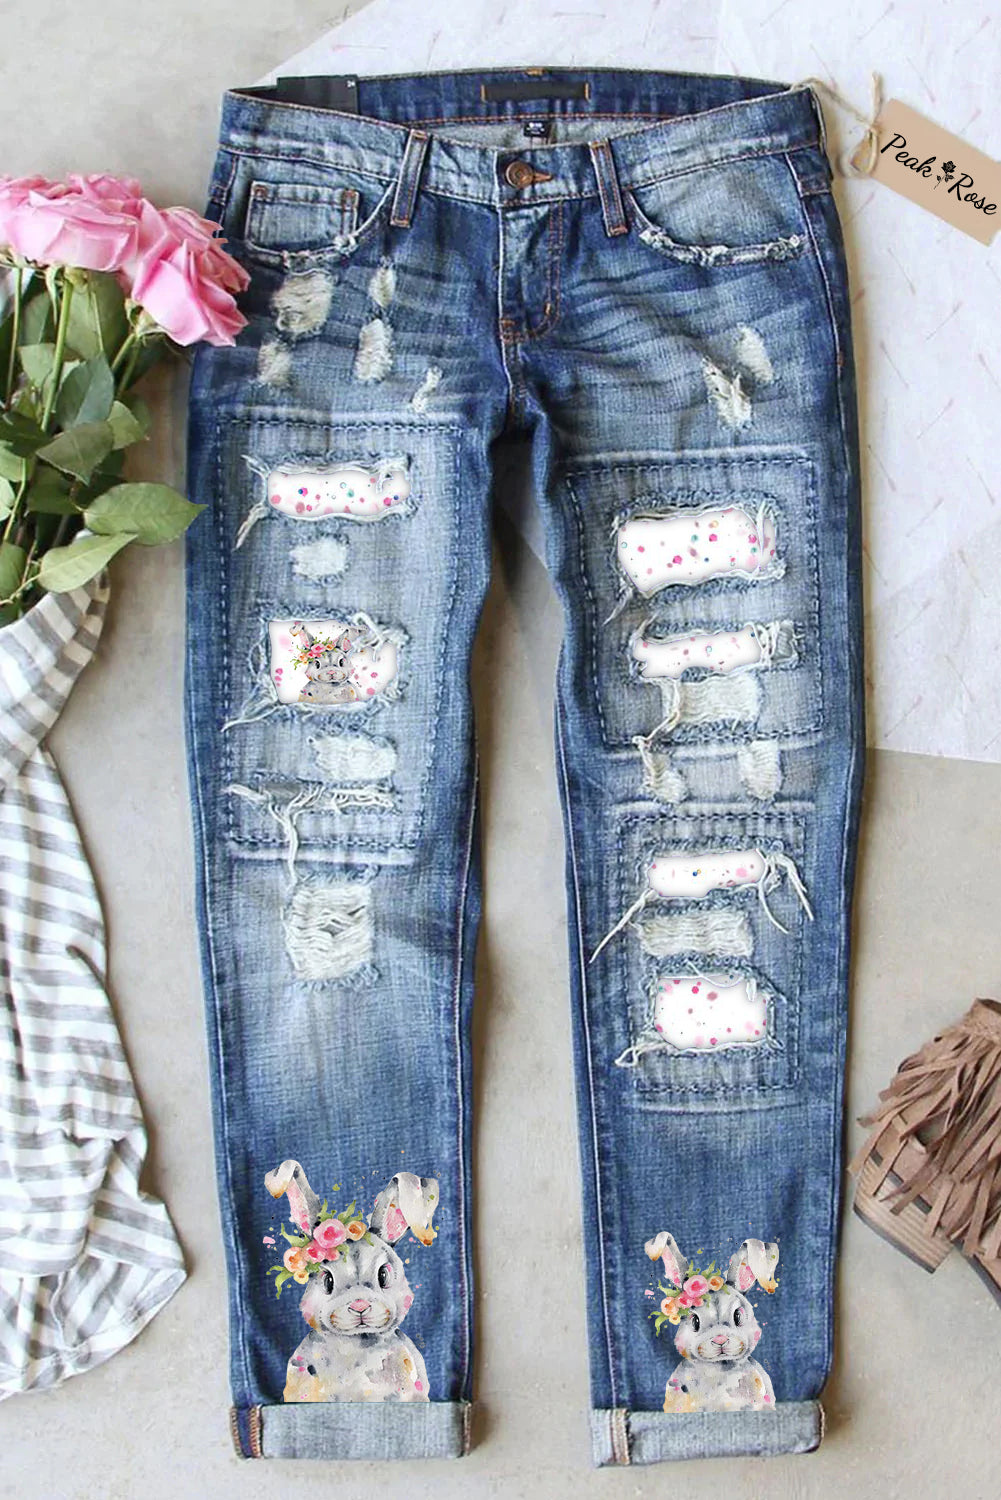 Bunny Rabbit Wearing Spring Flower Wreath  Multicolor Ink Dots Printed Casual Ripped Denim Jeans